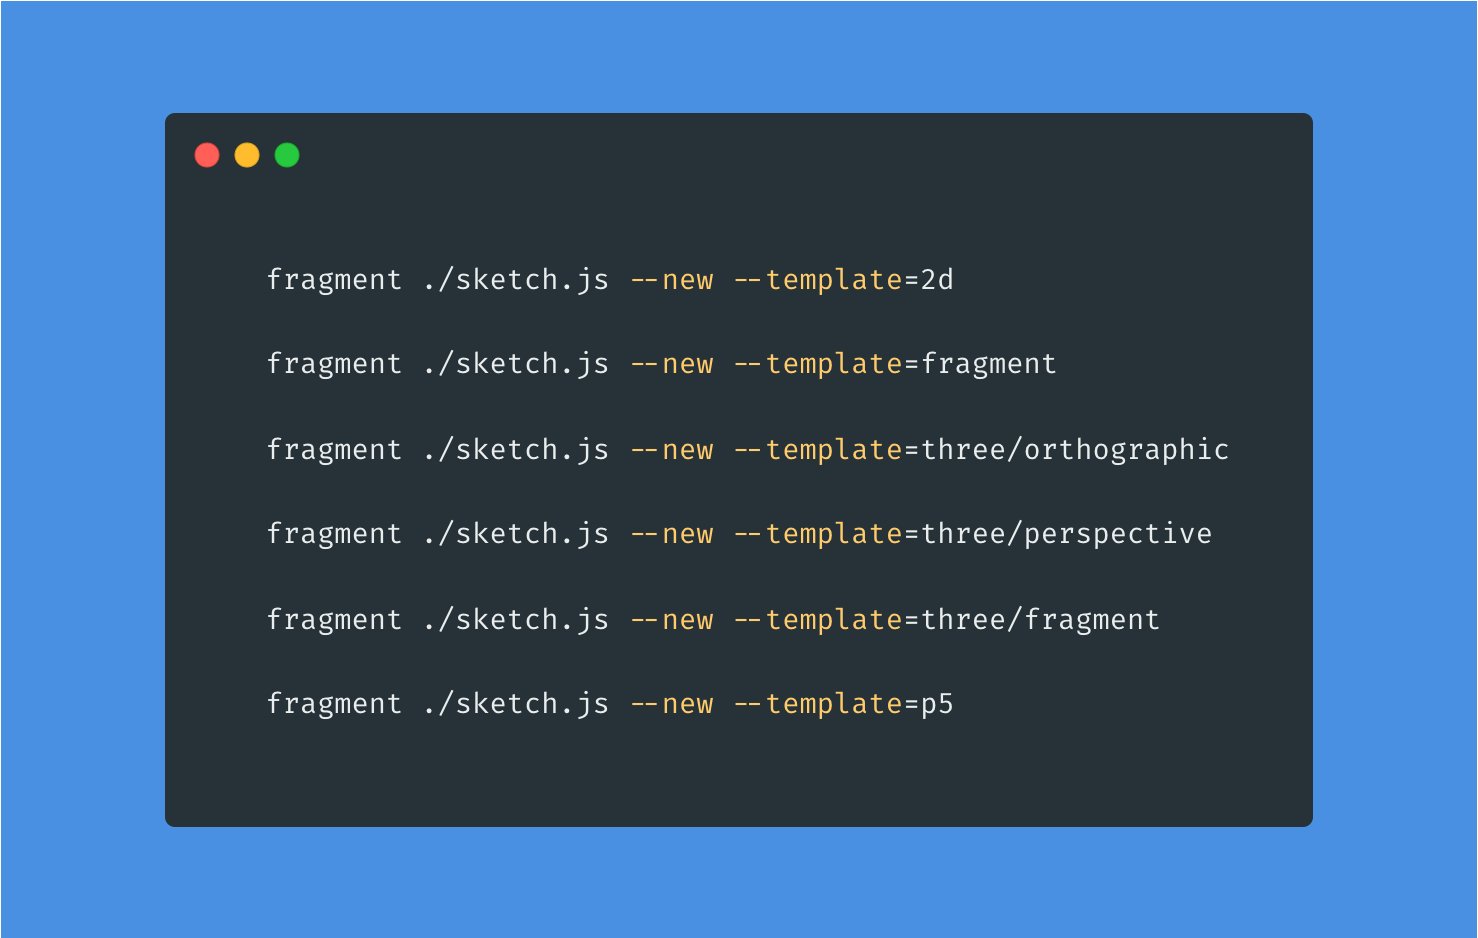 List of different command lines to create fragment sketches from template in a Terminal UI